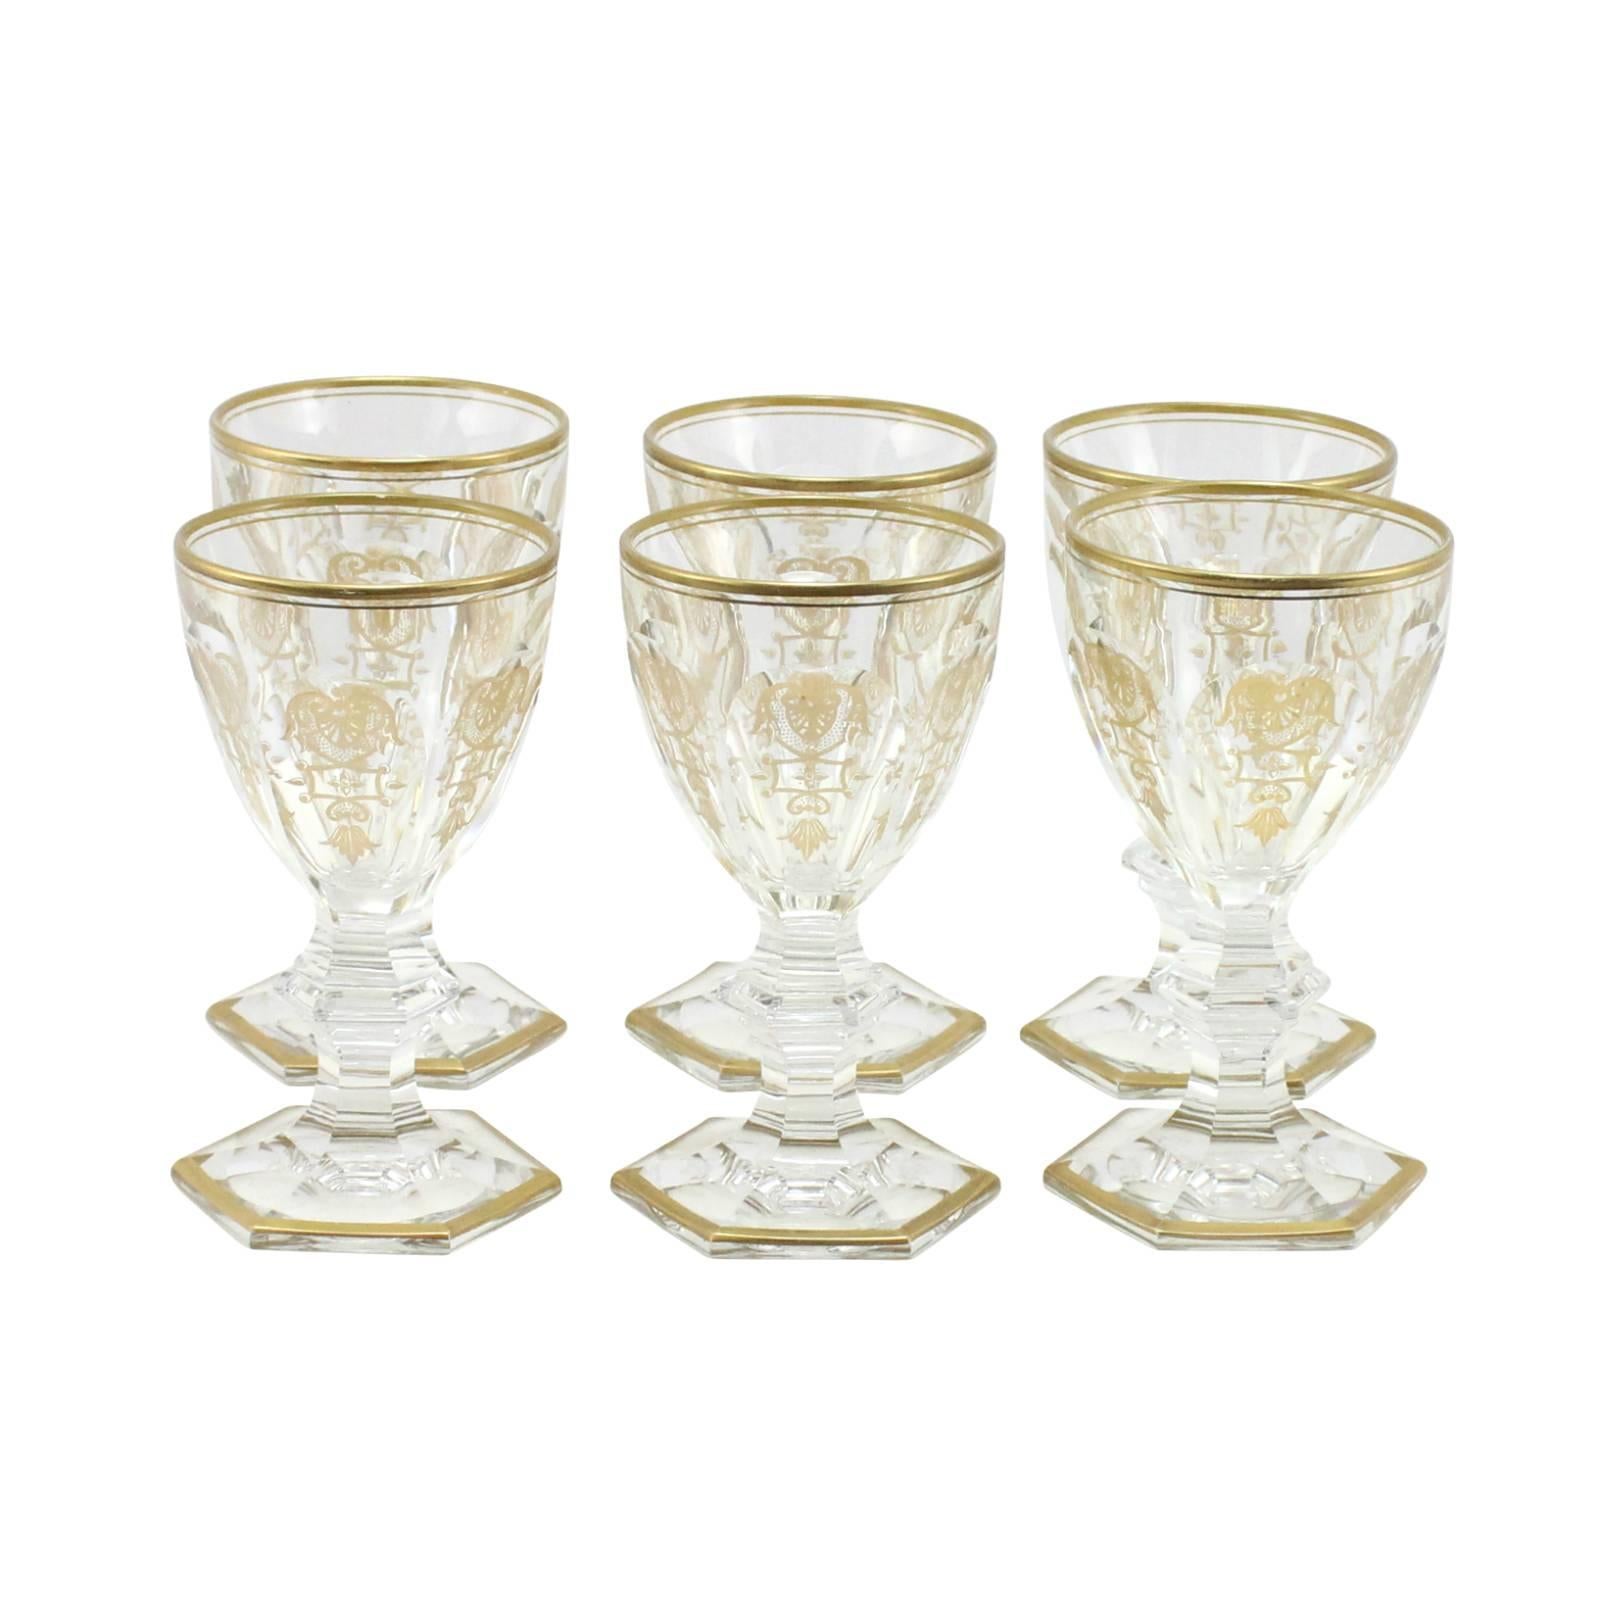 54-Piece Set of Baccarat Crystal in the Empire Pattern 1